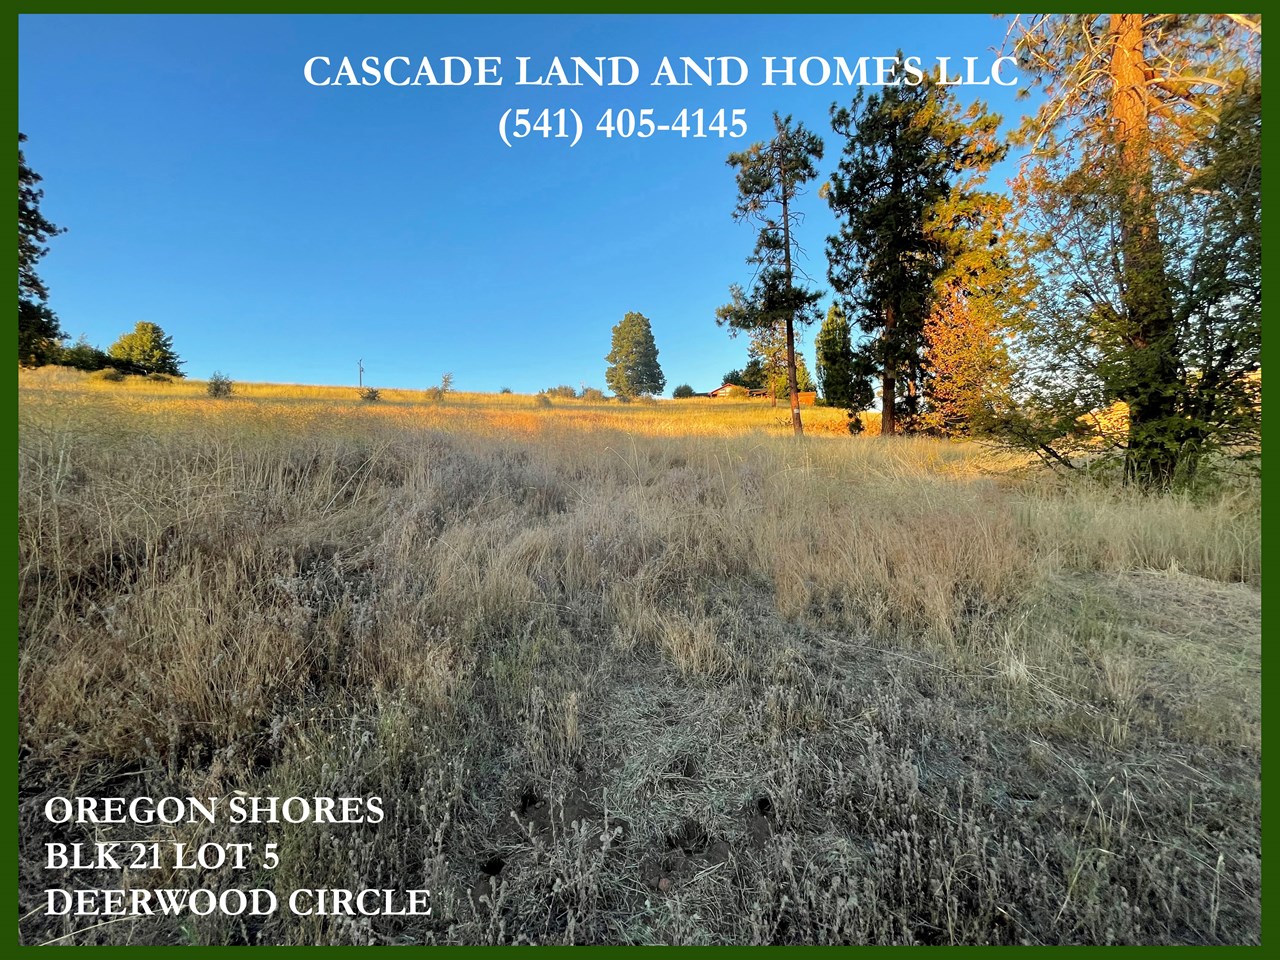 the property slopes uphill and would lend its self nicely to a two-story home. the property is mostly cleared and covered with native grasses. there are a few large mature pine trees for privacy and shade on those warm summer afternoons.